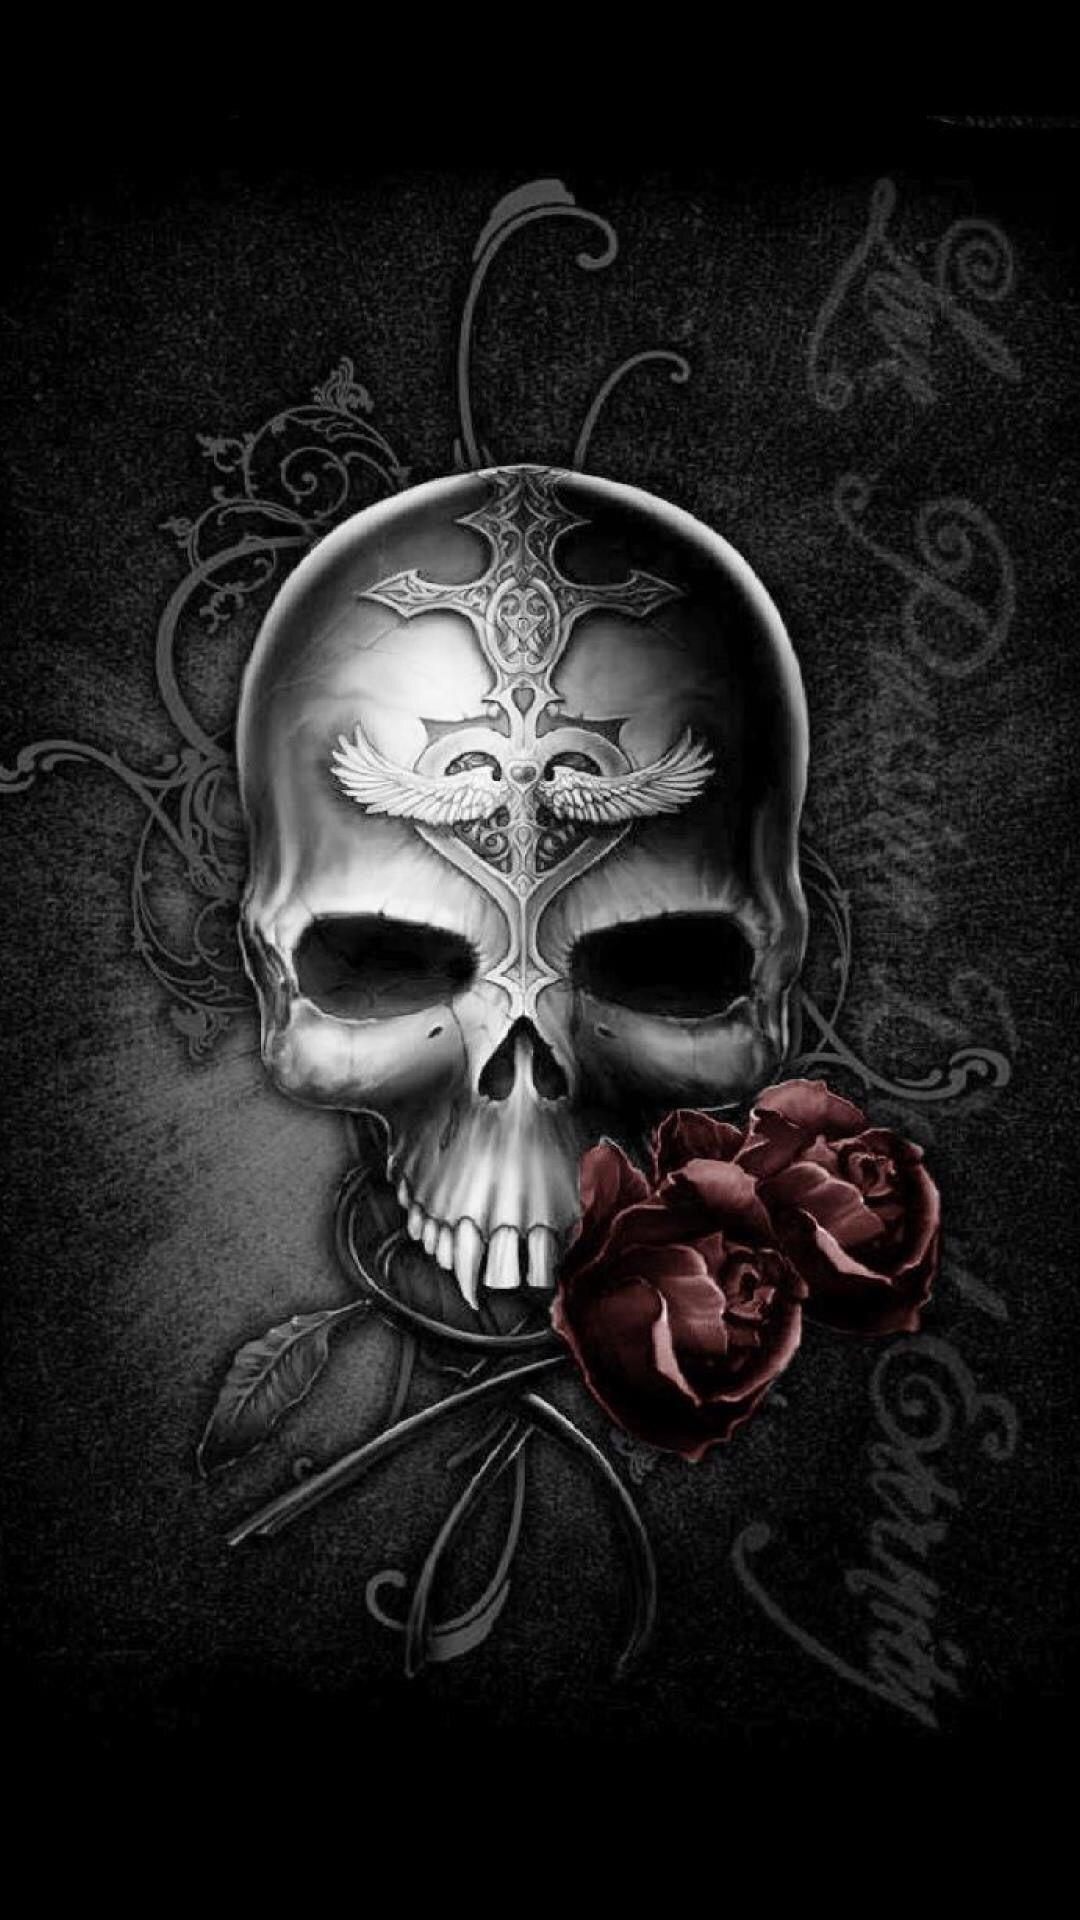 Badass Wallpaper For Android 03 0f 40 Dark Skull and Rose. HD